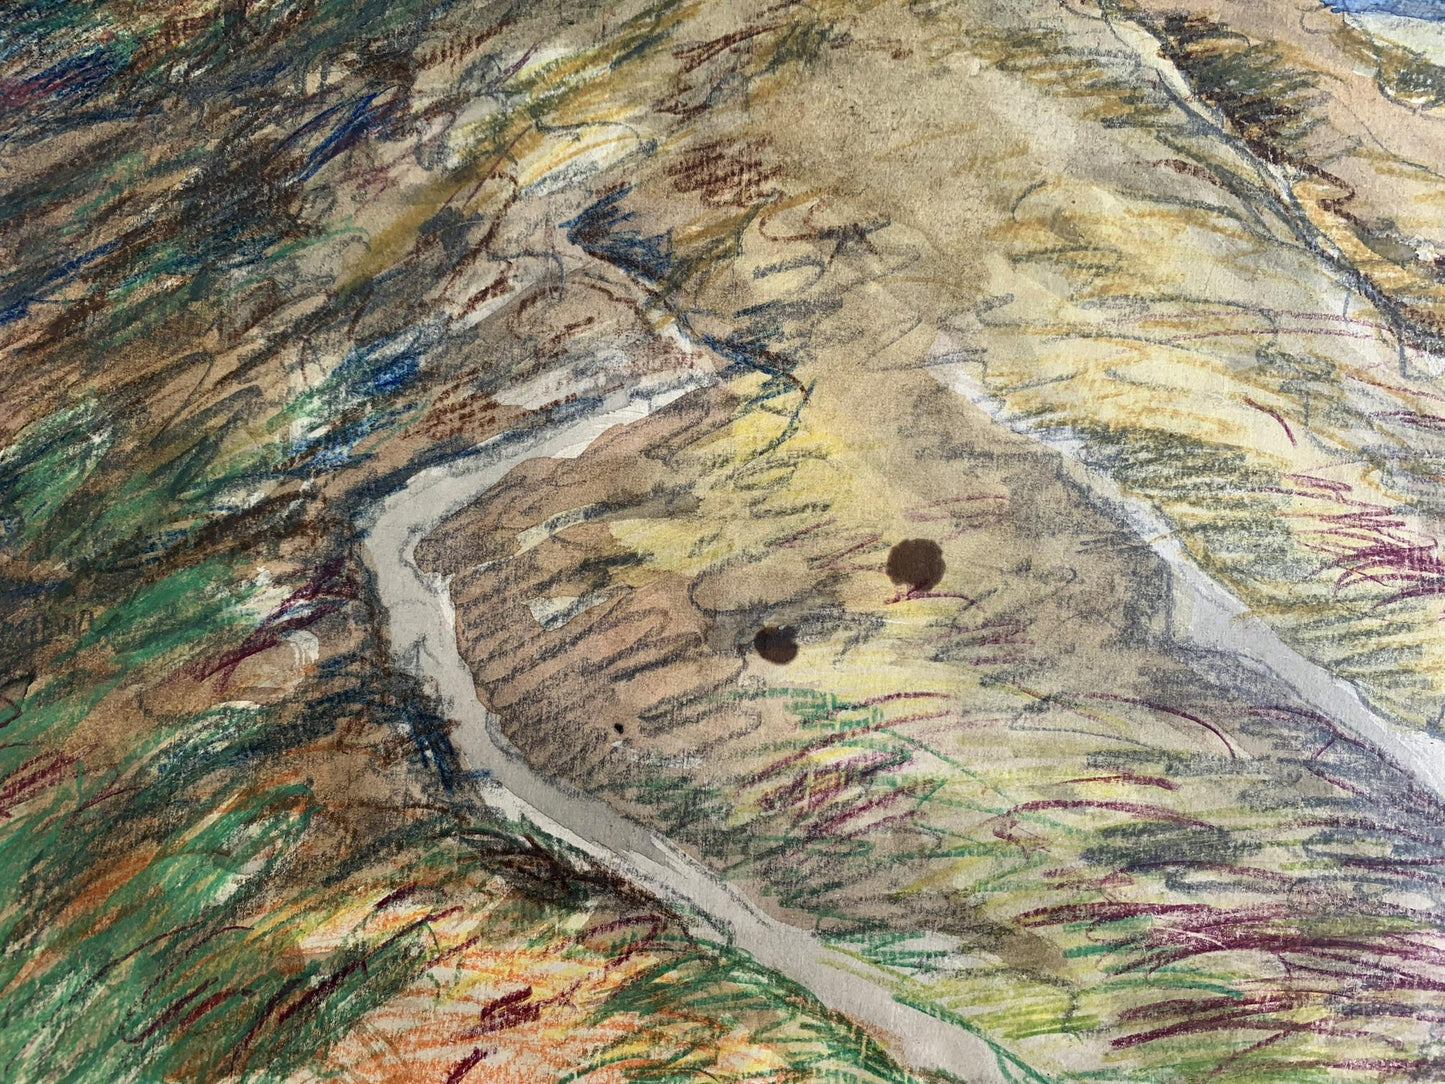 Colored pencils painting The hills A. G. Cherkas